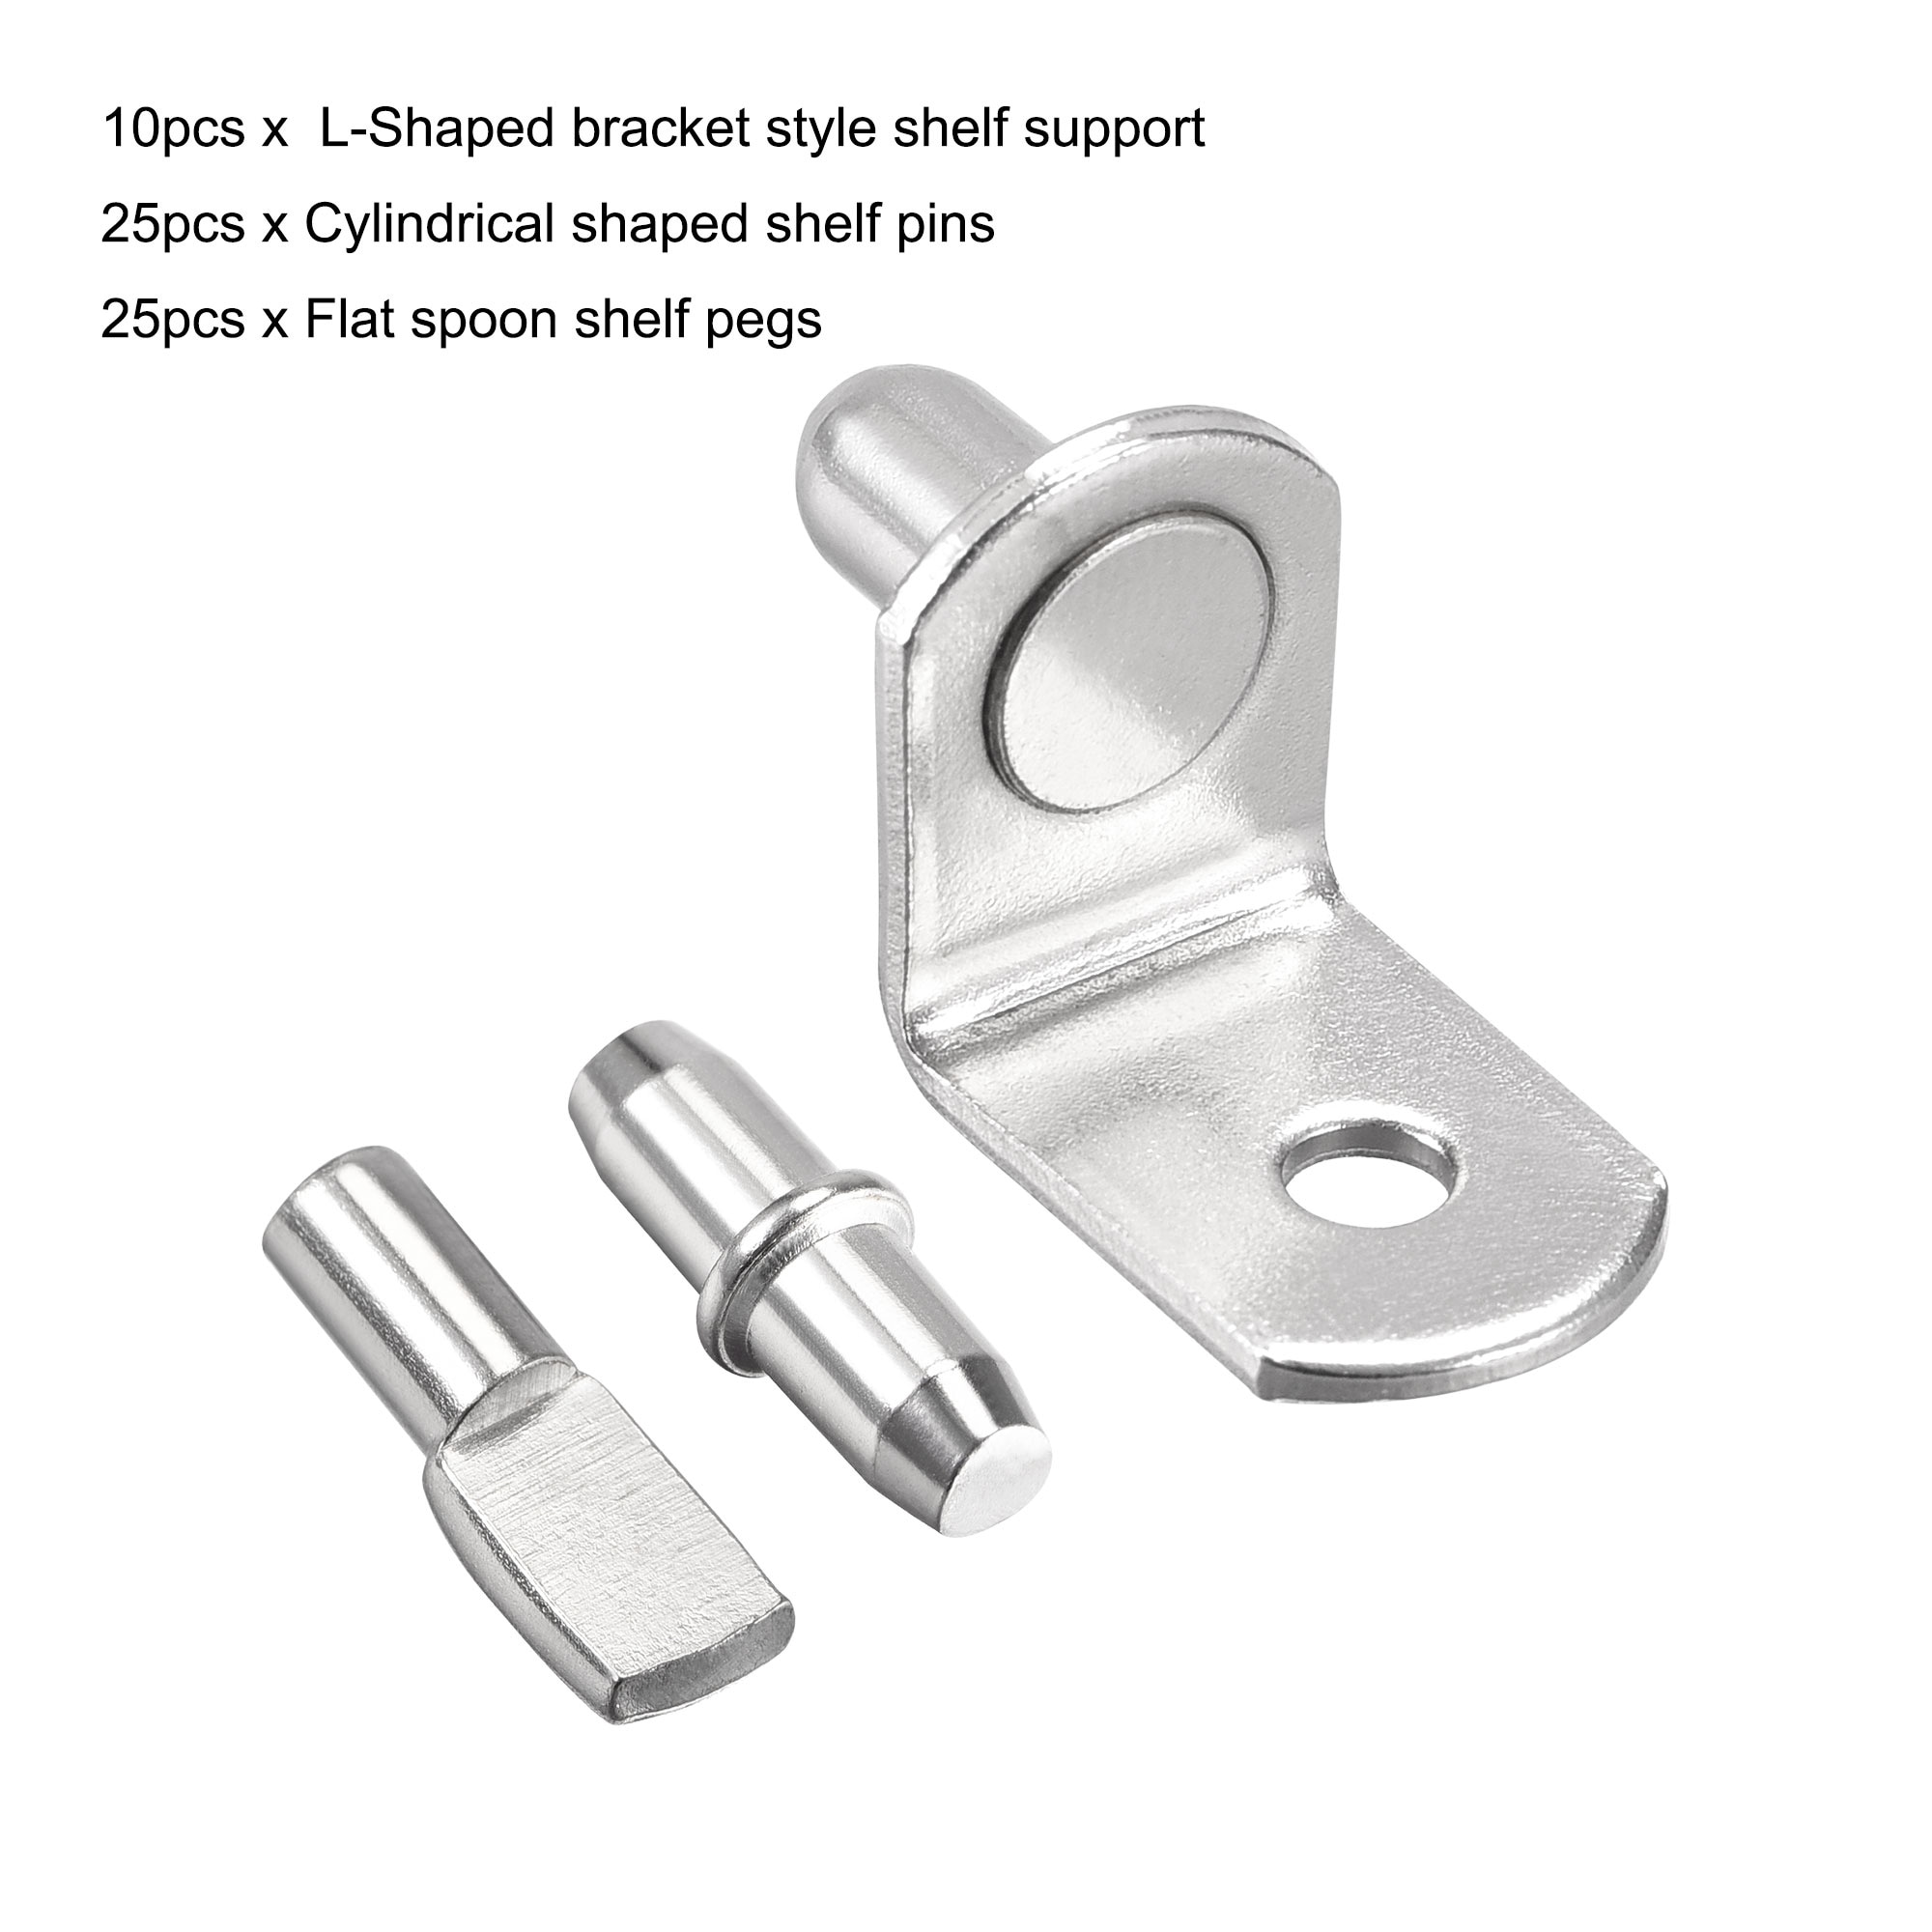 Shelf Support Peg 3 Style Bracket Pegs 5mm 6mm Pin with Hole 60pcs - Silver  Tone - Bed Bath & Beyond - 33874945